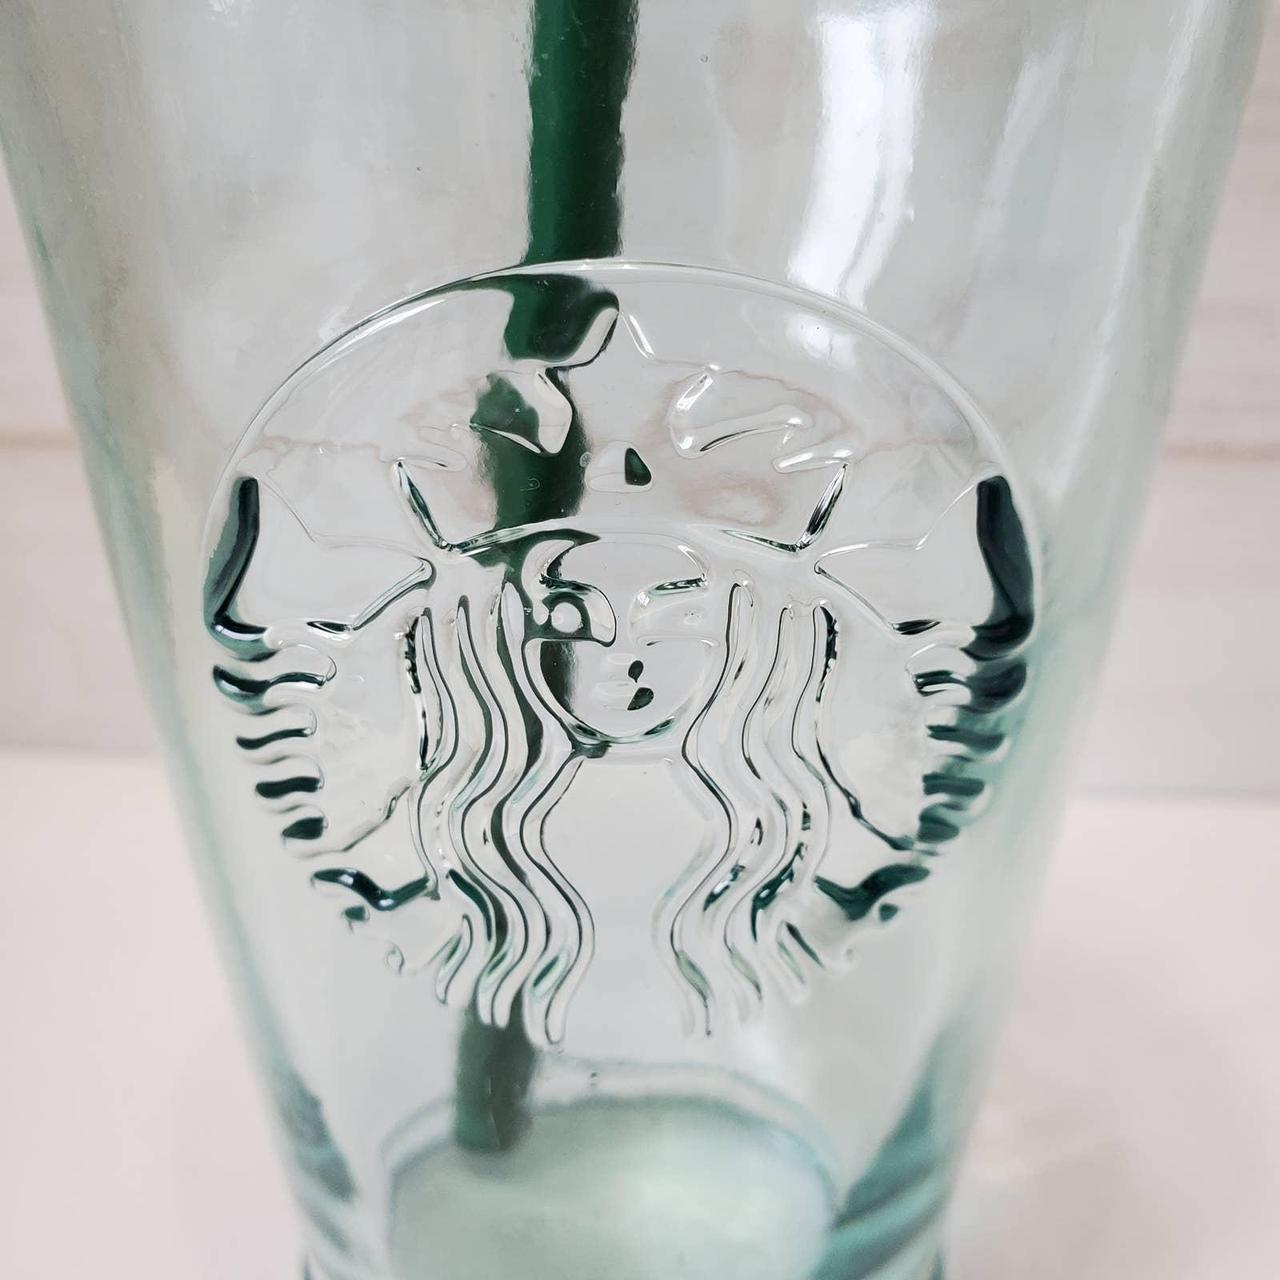 Starbucks Recycled Glass Cold-to-go Cup 16 FL - Depop